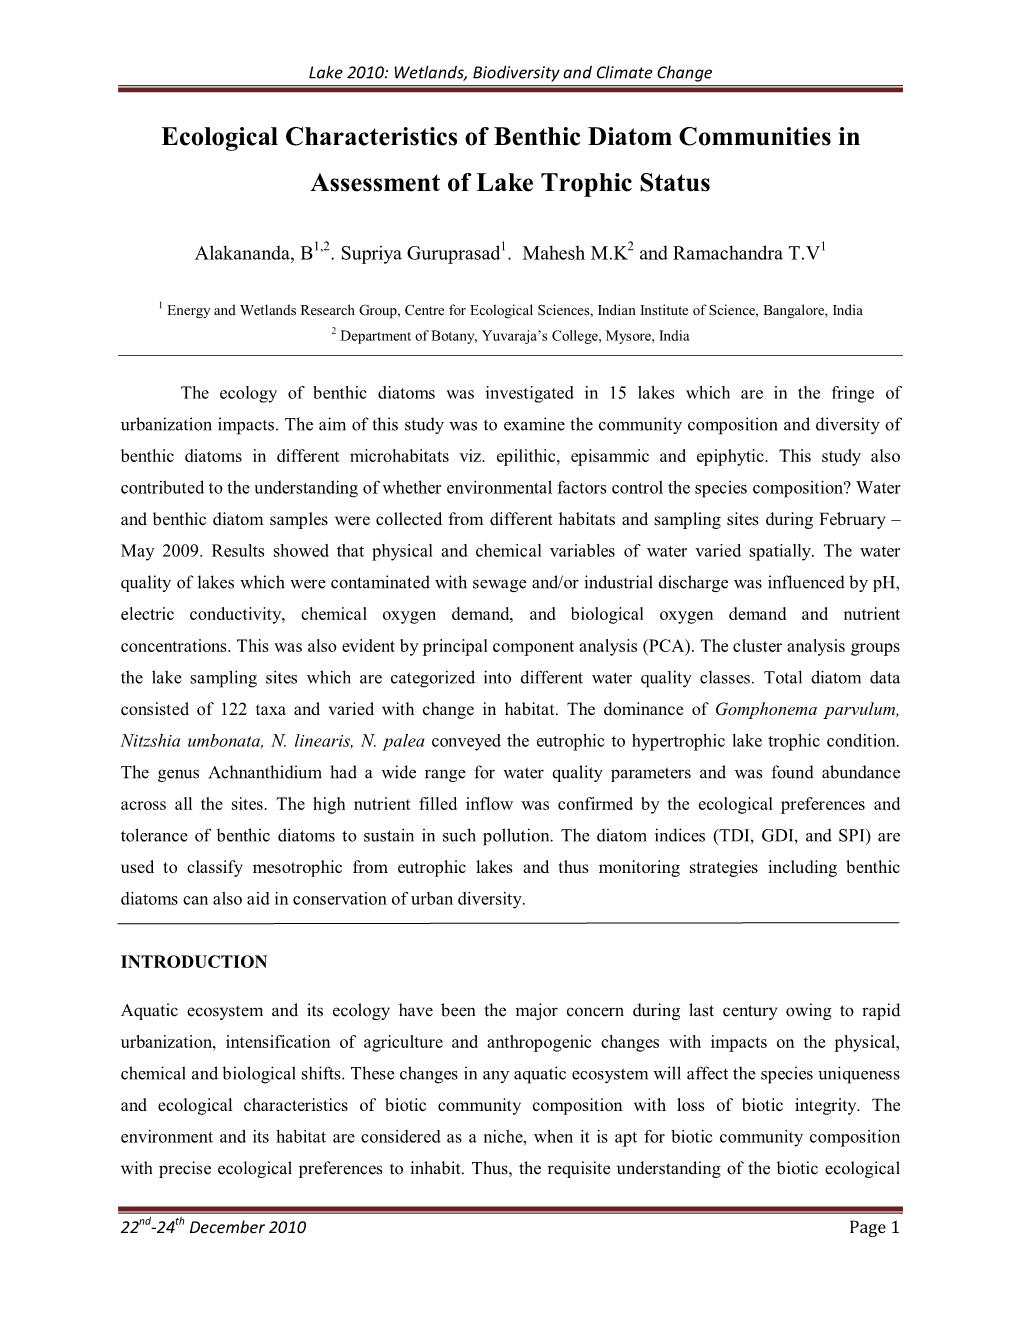 Ecological Characteristics of Benthic Diatom Communities in Assessment of Lake Trophic Status